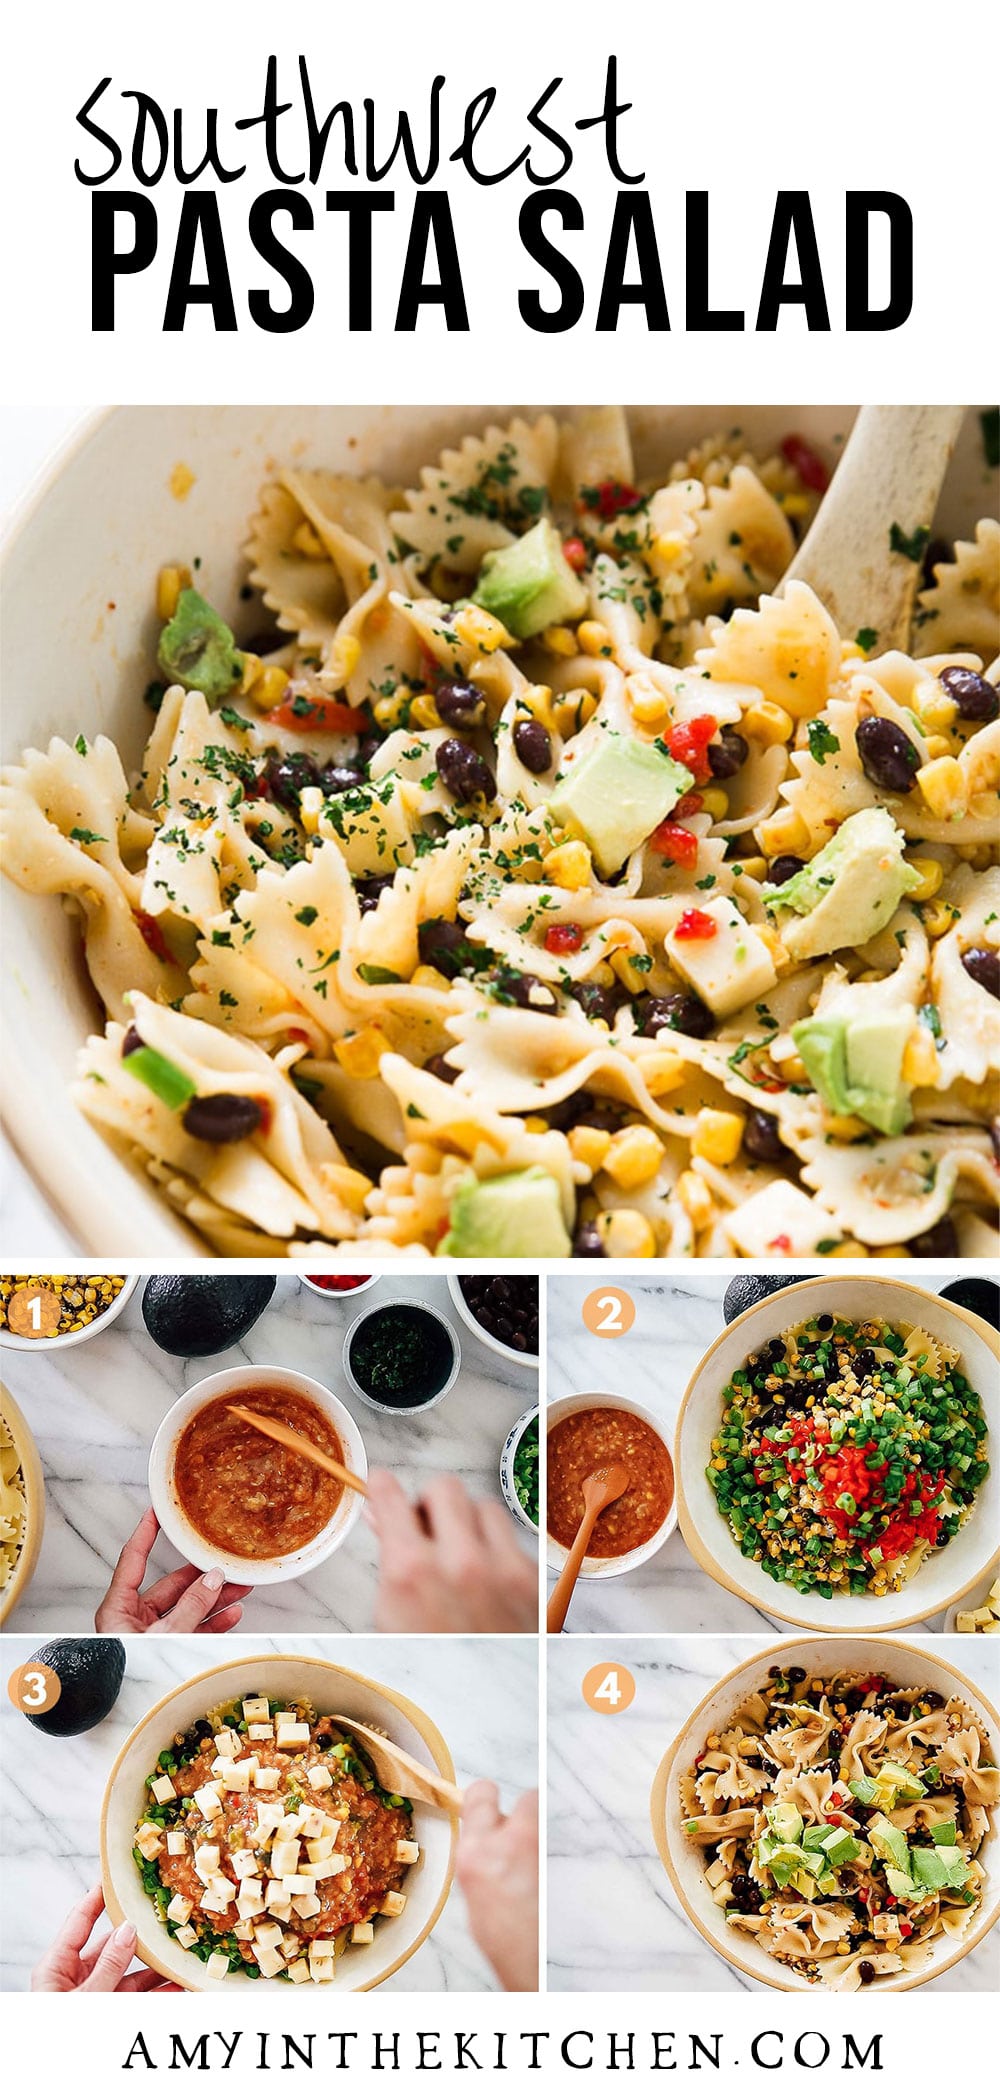 Southwest Pasta Salad - Light and Delicious! | Amy in the Kitchen